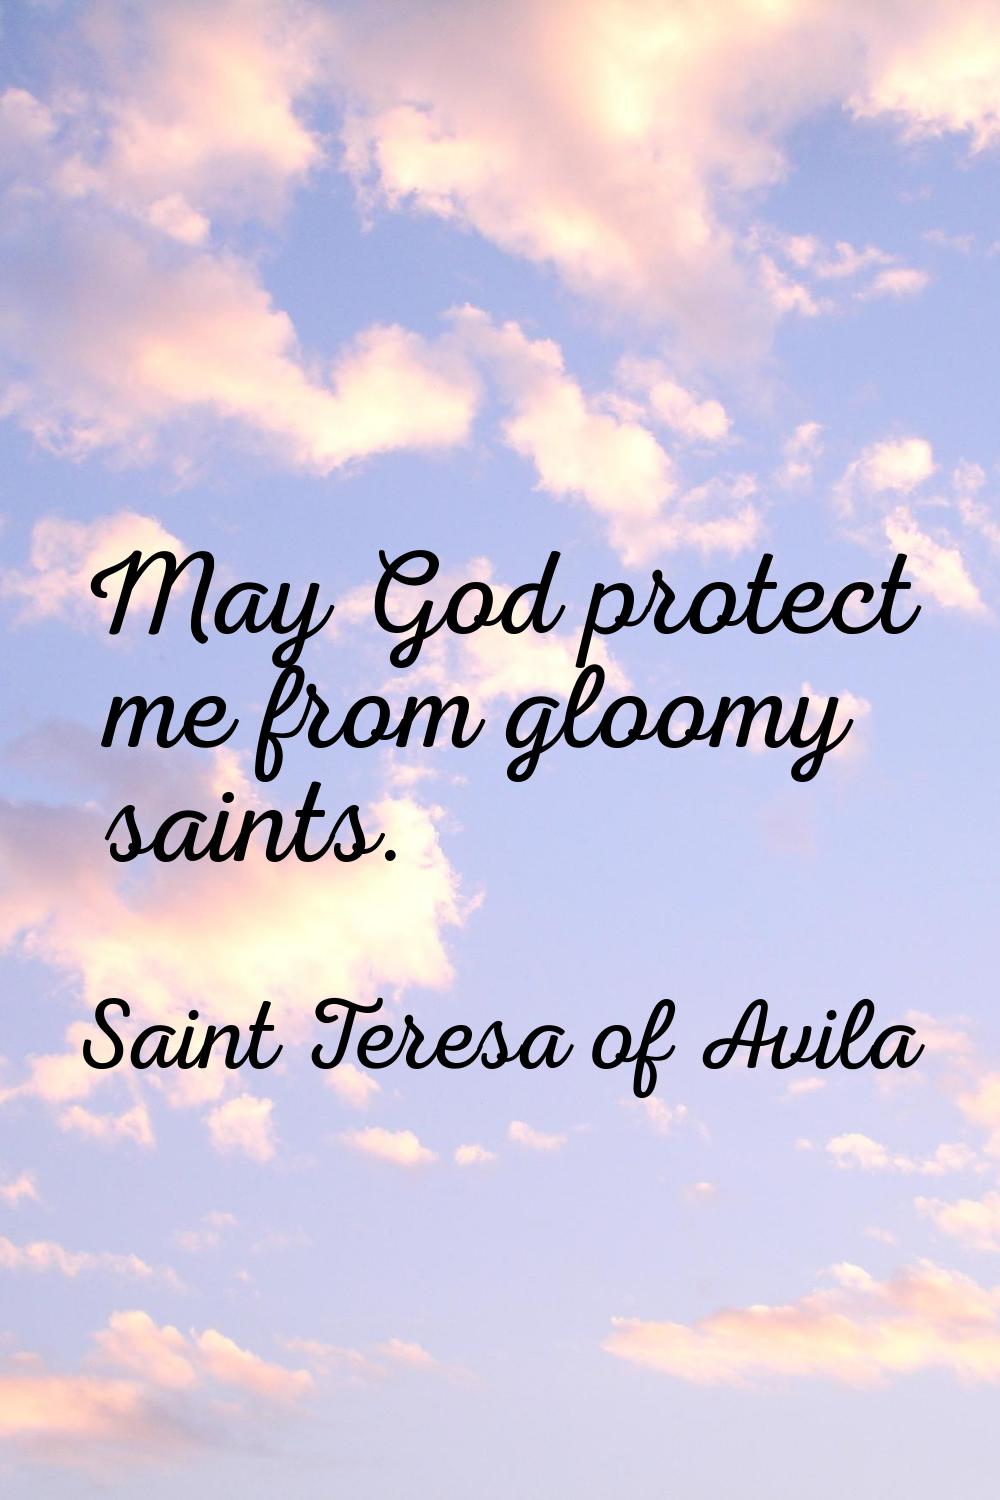 May God protect me from gloomy saints.